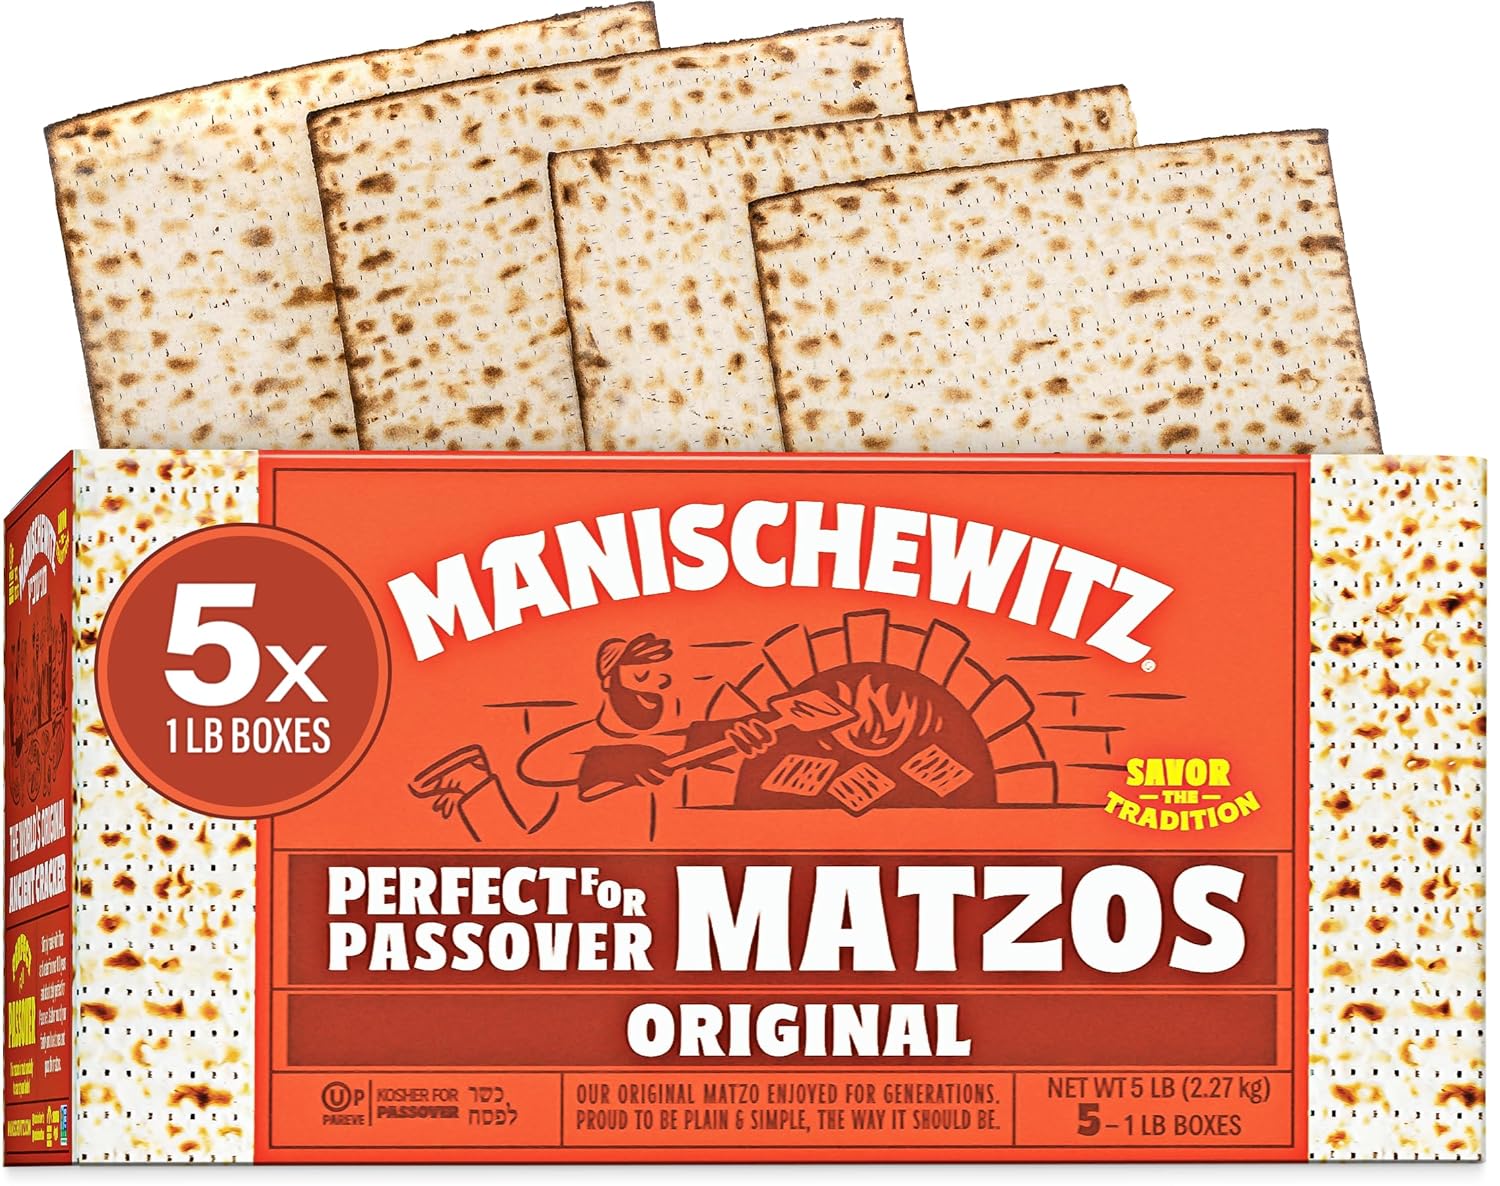 Manischewitz Passover Matzo (5x1lb Boxes) The Original Manischewitz Passover Matzo | Two Ingredients only - Flour and Water - 18 Min Matzo | Unsalted | Kosher for Passover and Year Round